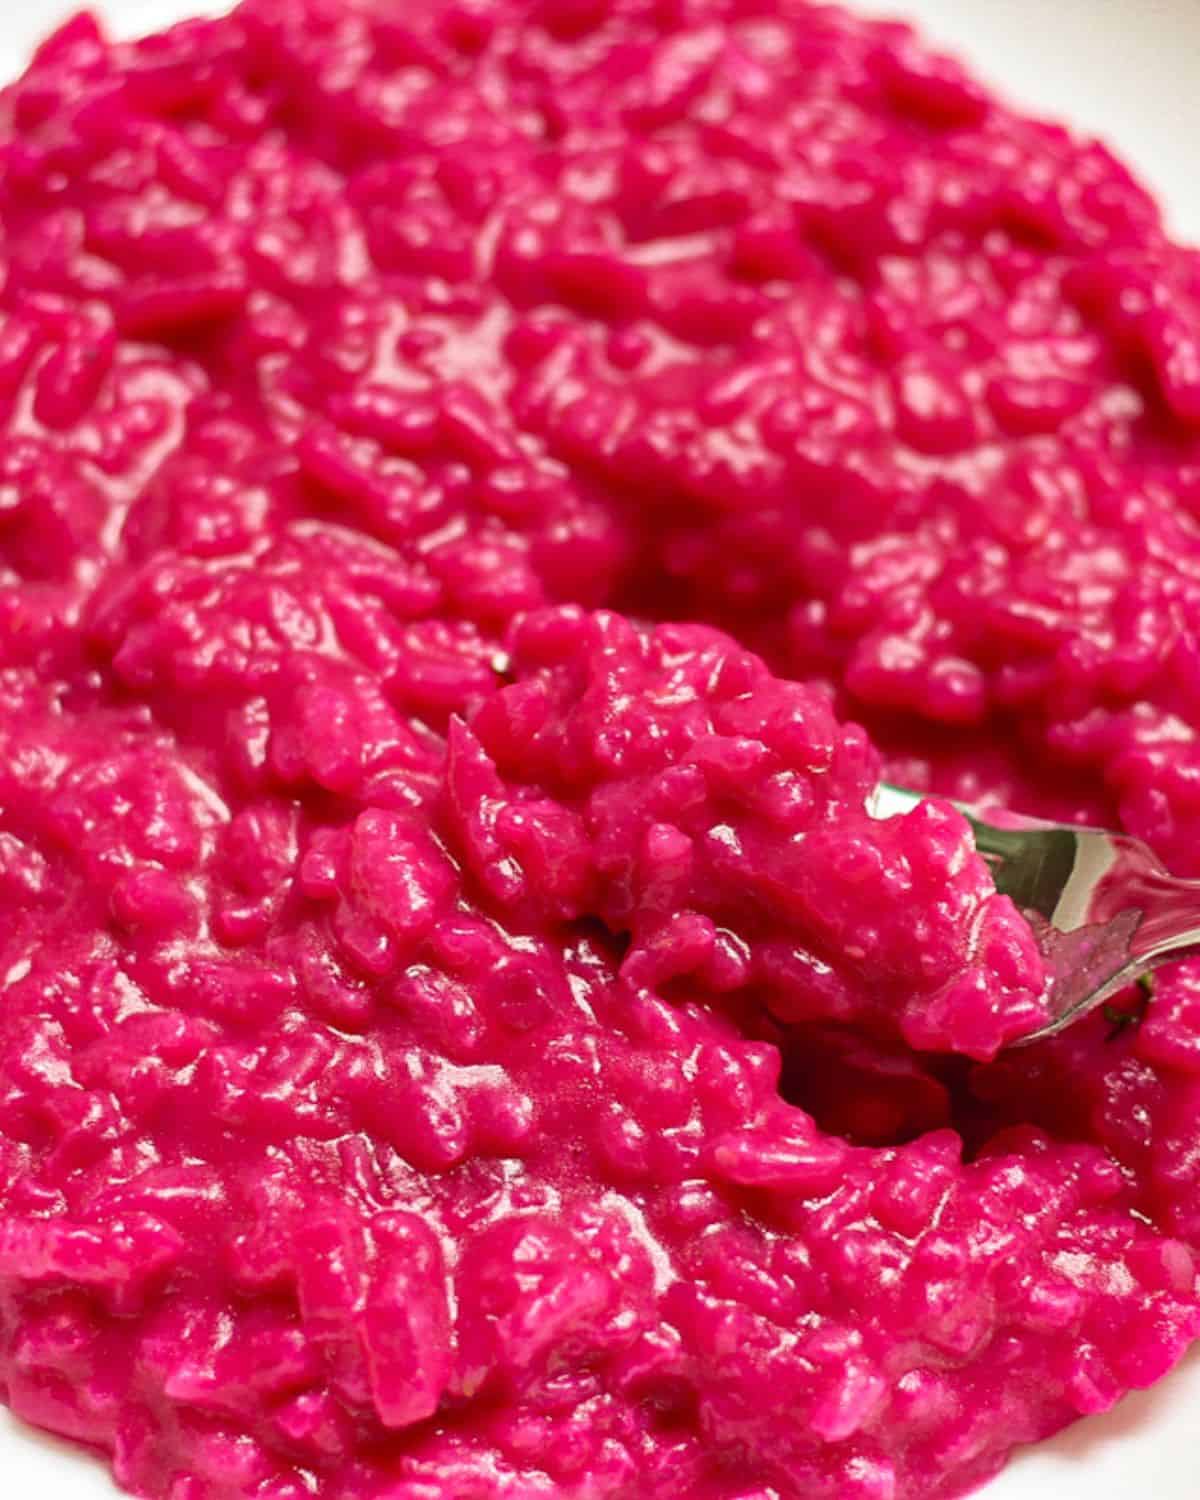 Pink beetroot risotto in a white dish with a fork scooping the risotto.